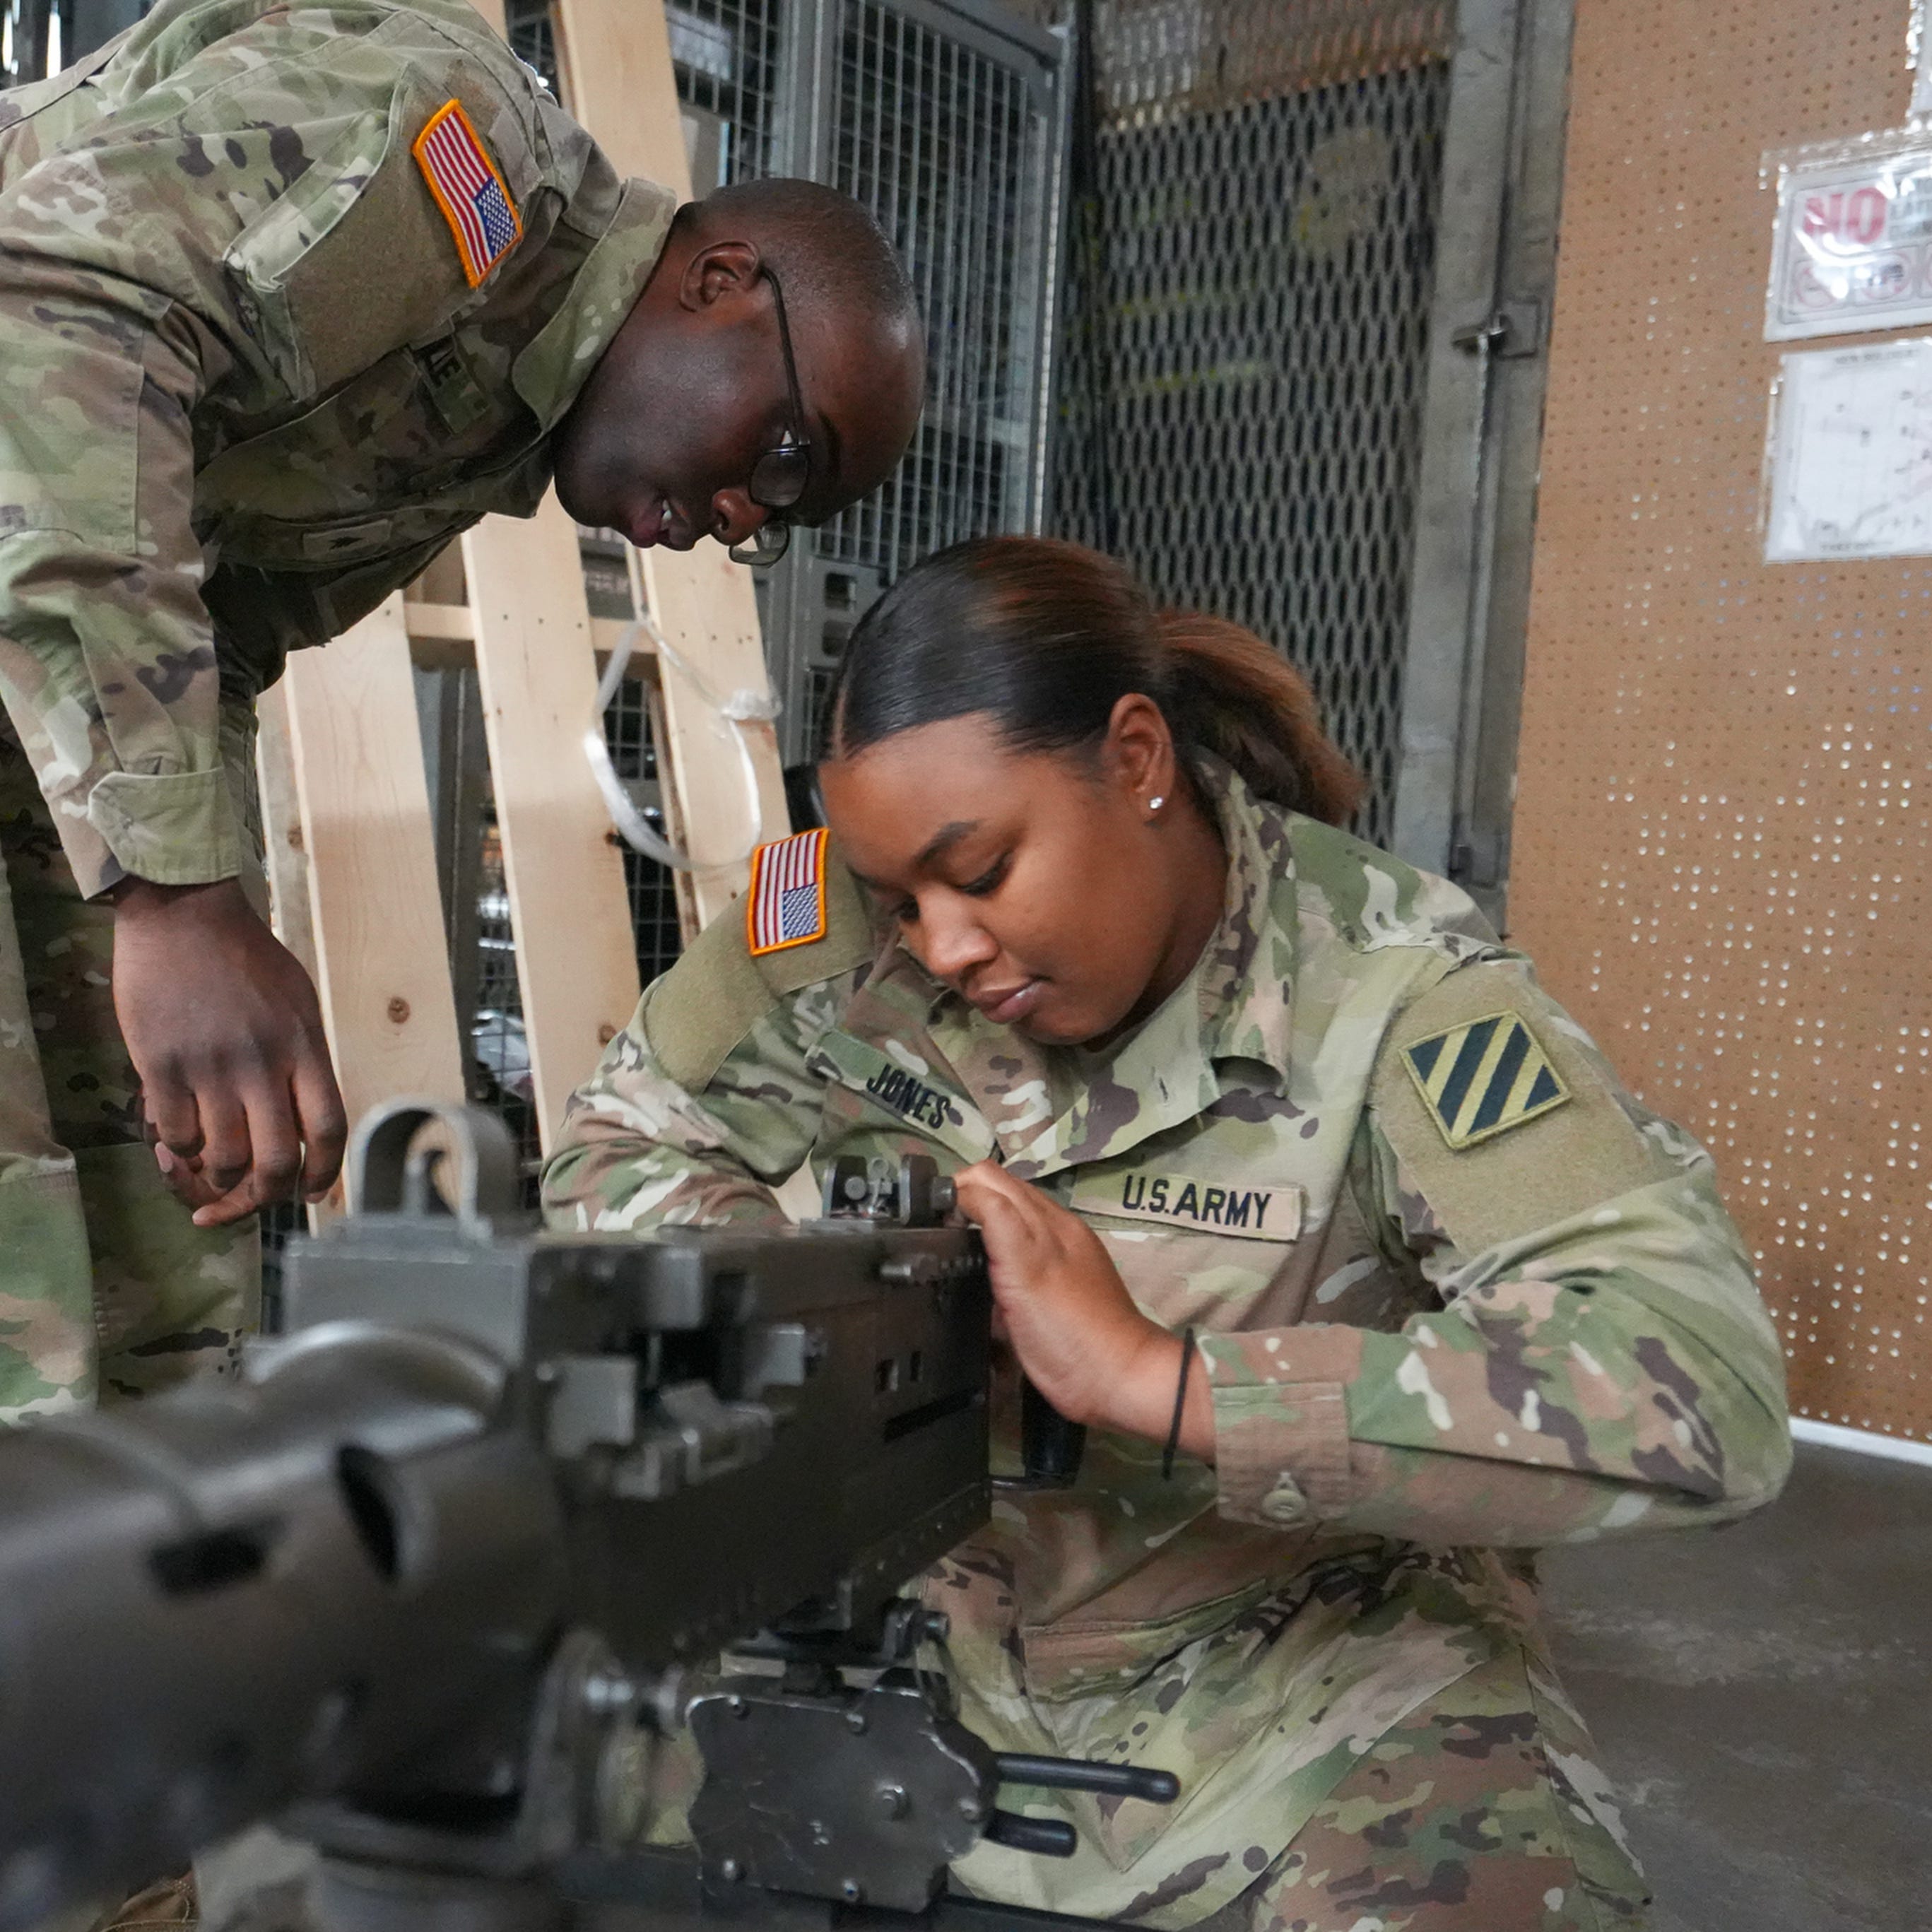 Staff Sergeant Ricora Jones and her crew train on weapons at Ft. Stewart in Georgia on March 20, 2023. Jones trains and works on tanks as an armor crewman, one of few women in the armor and cavalry branch. She's also pregnant with her first child, a boy.